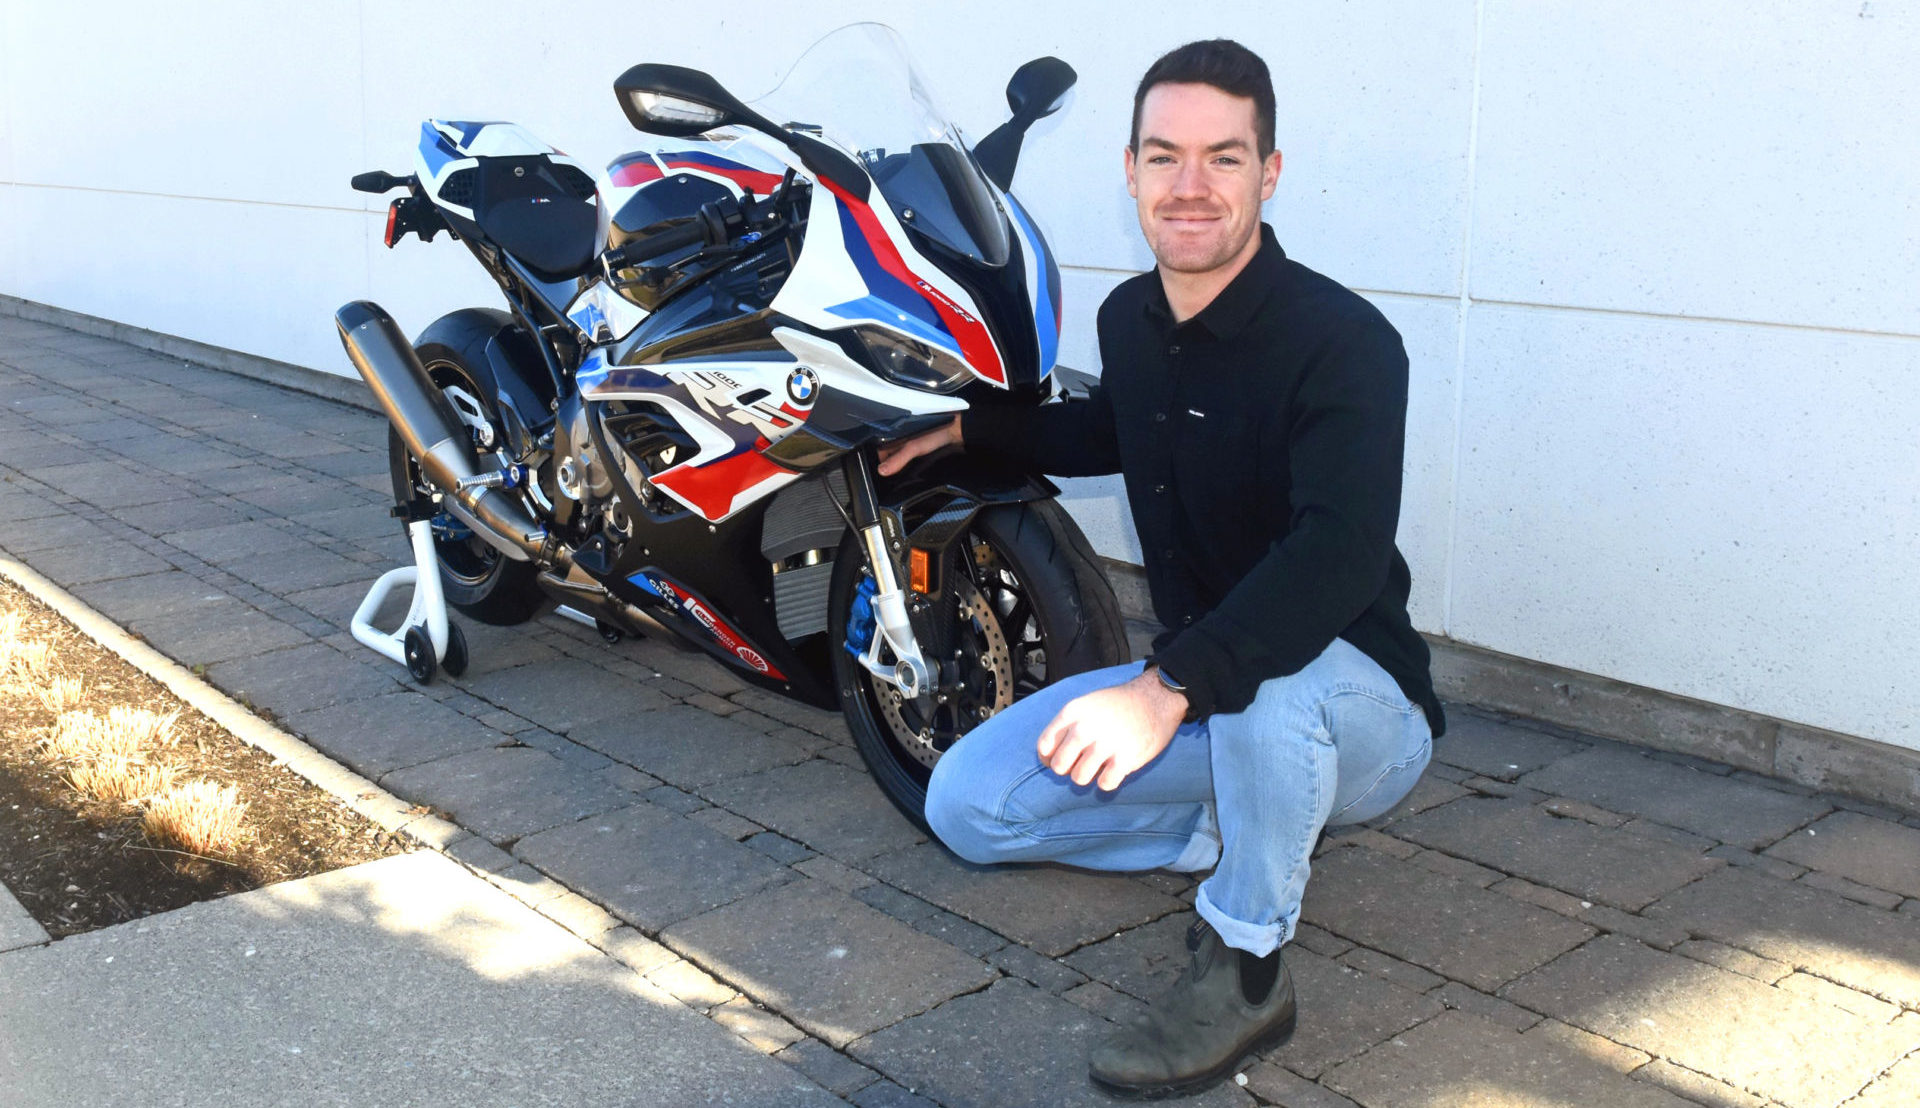 Ben Young won the 2021 BMW Motorrad Race Trophy competition and its grand prize - a new BMW M 1000 RR. Photo courtesy BMW Motorrad.